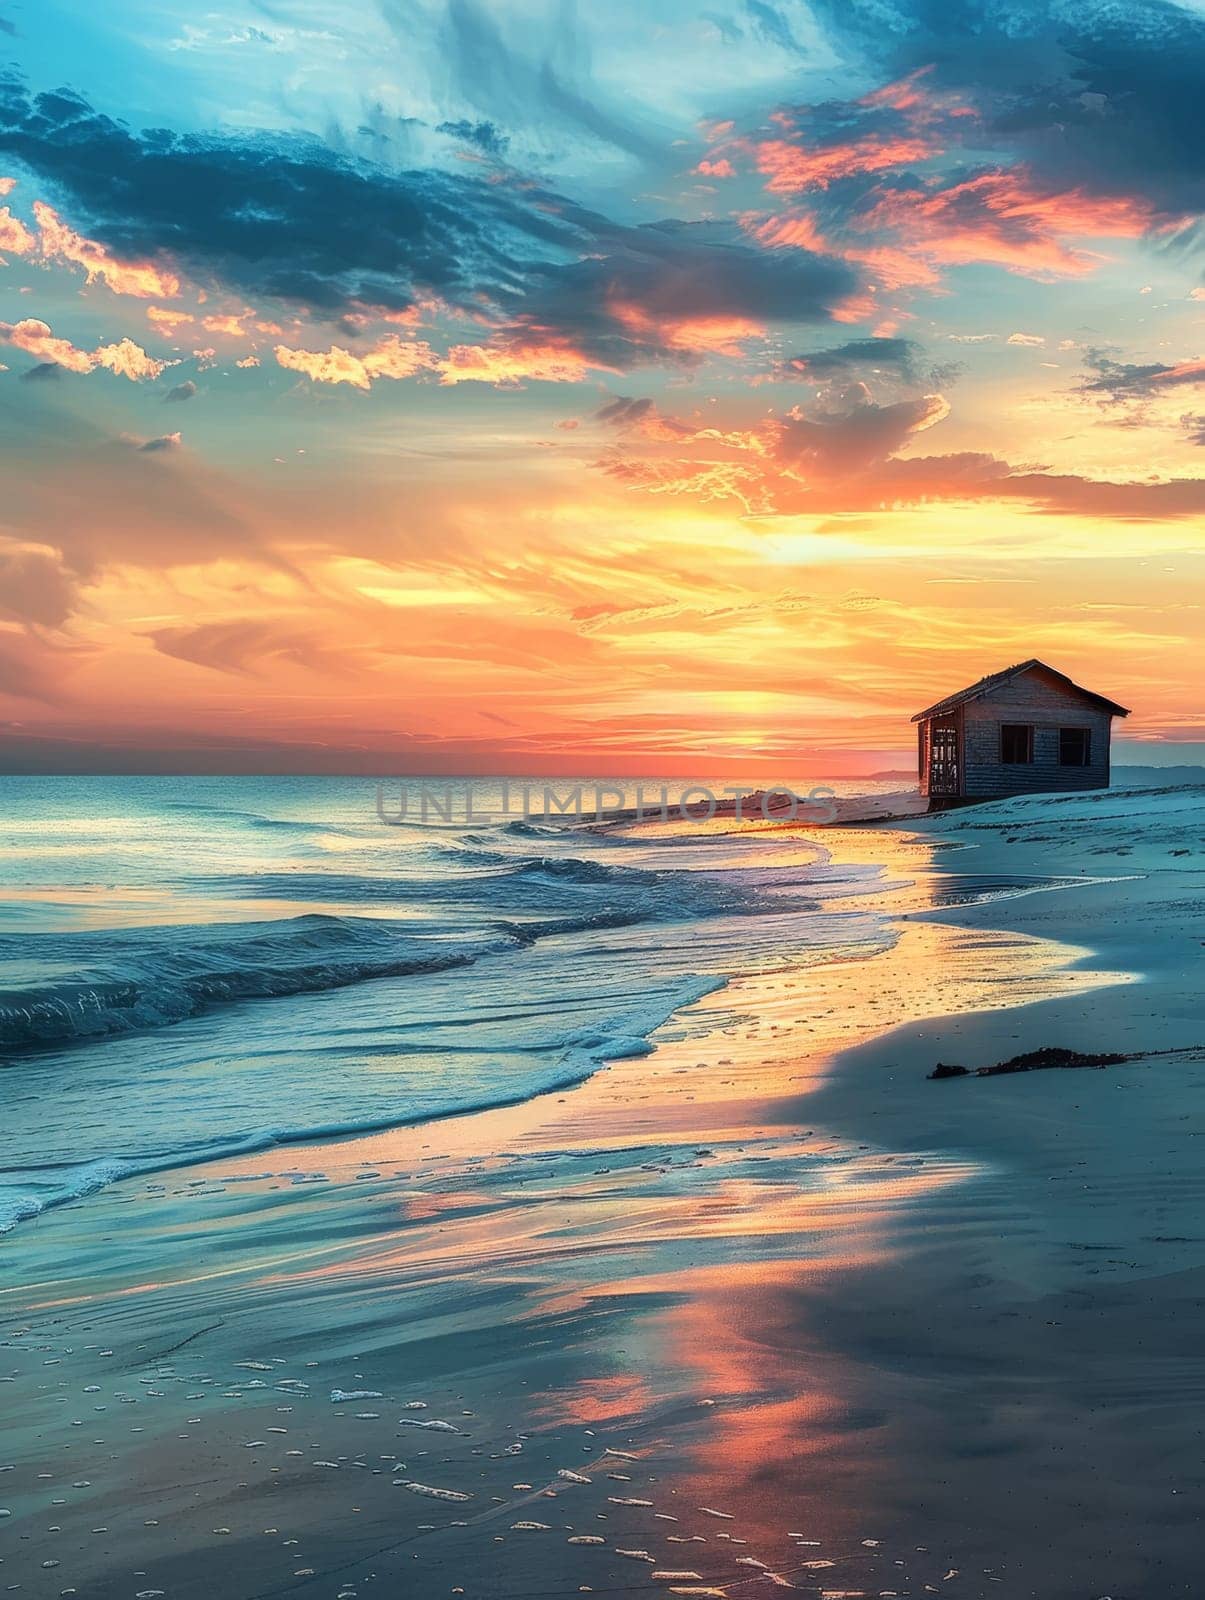 A serene beach at sunset, featuring a lifeguard hut, calm waves, and a sky painted with hues of orange and blue